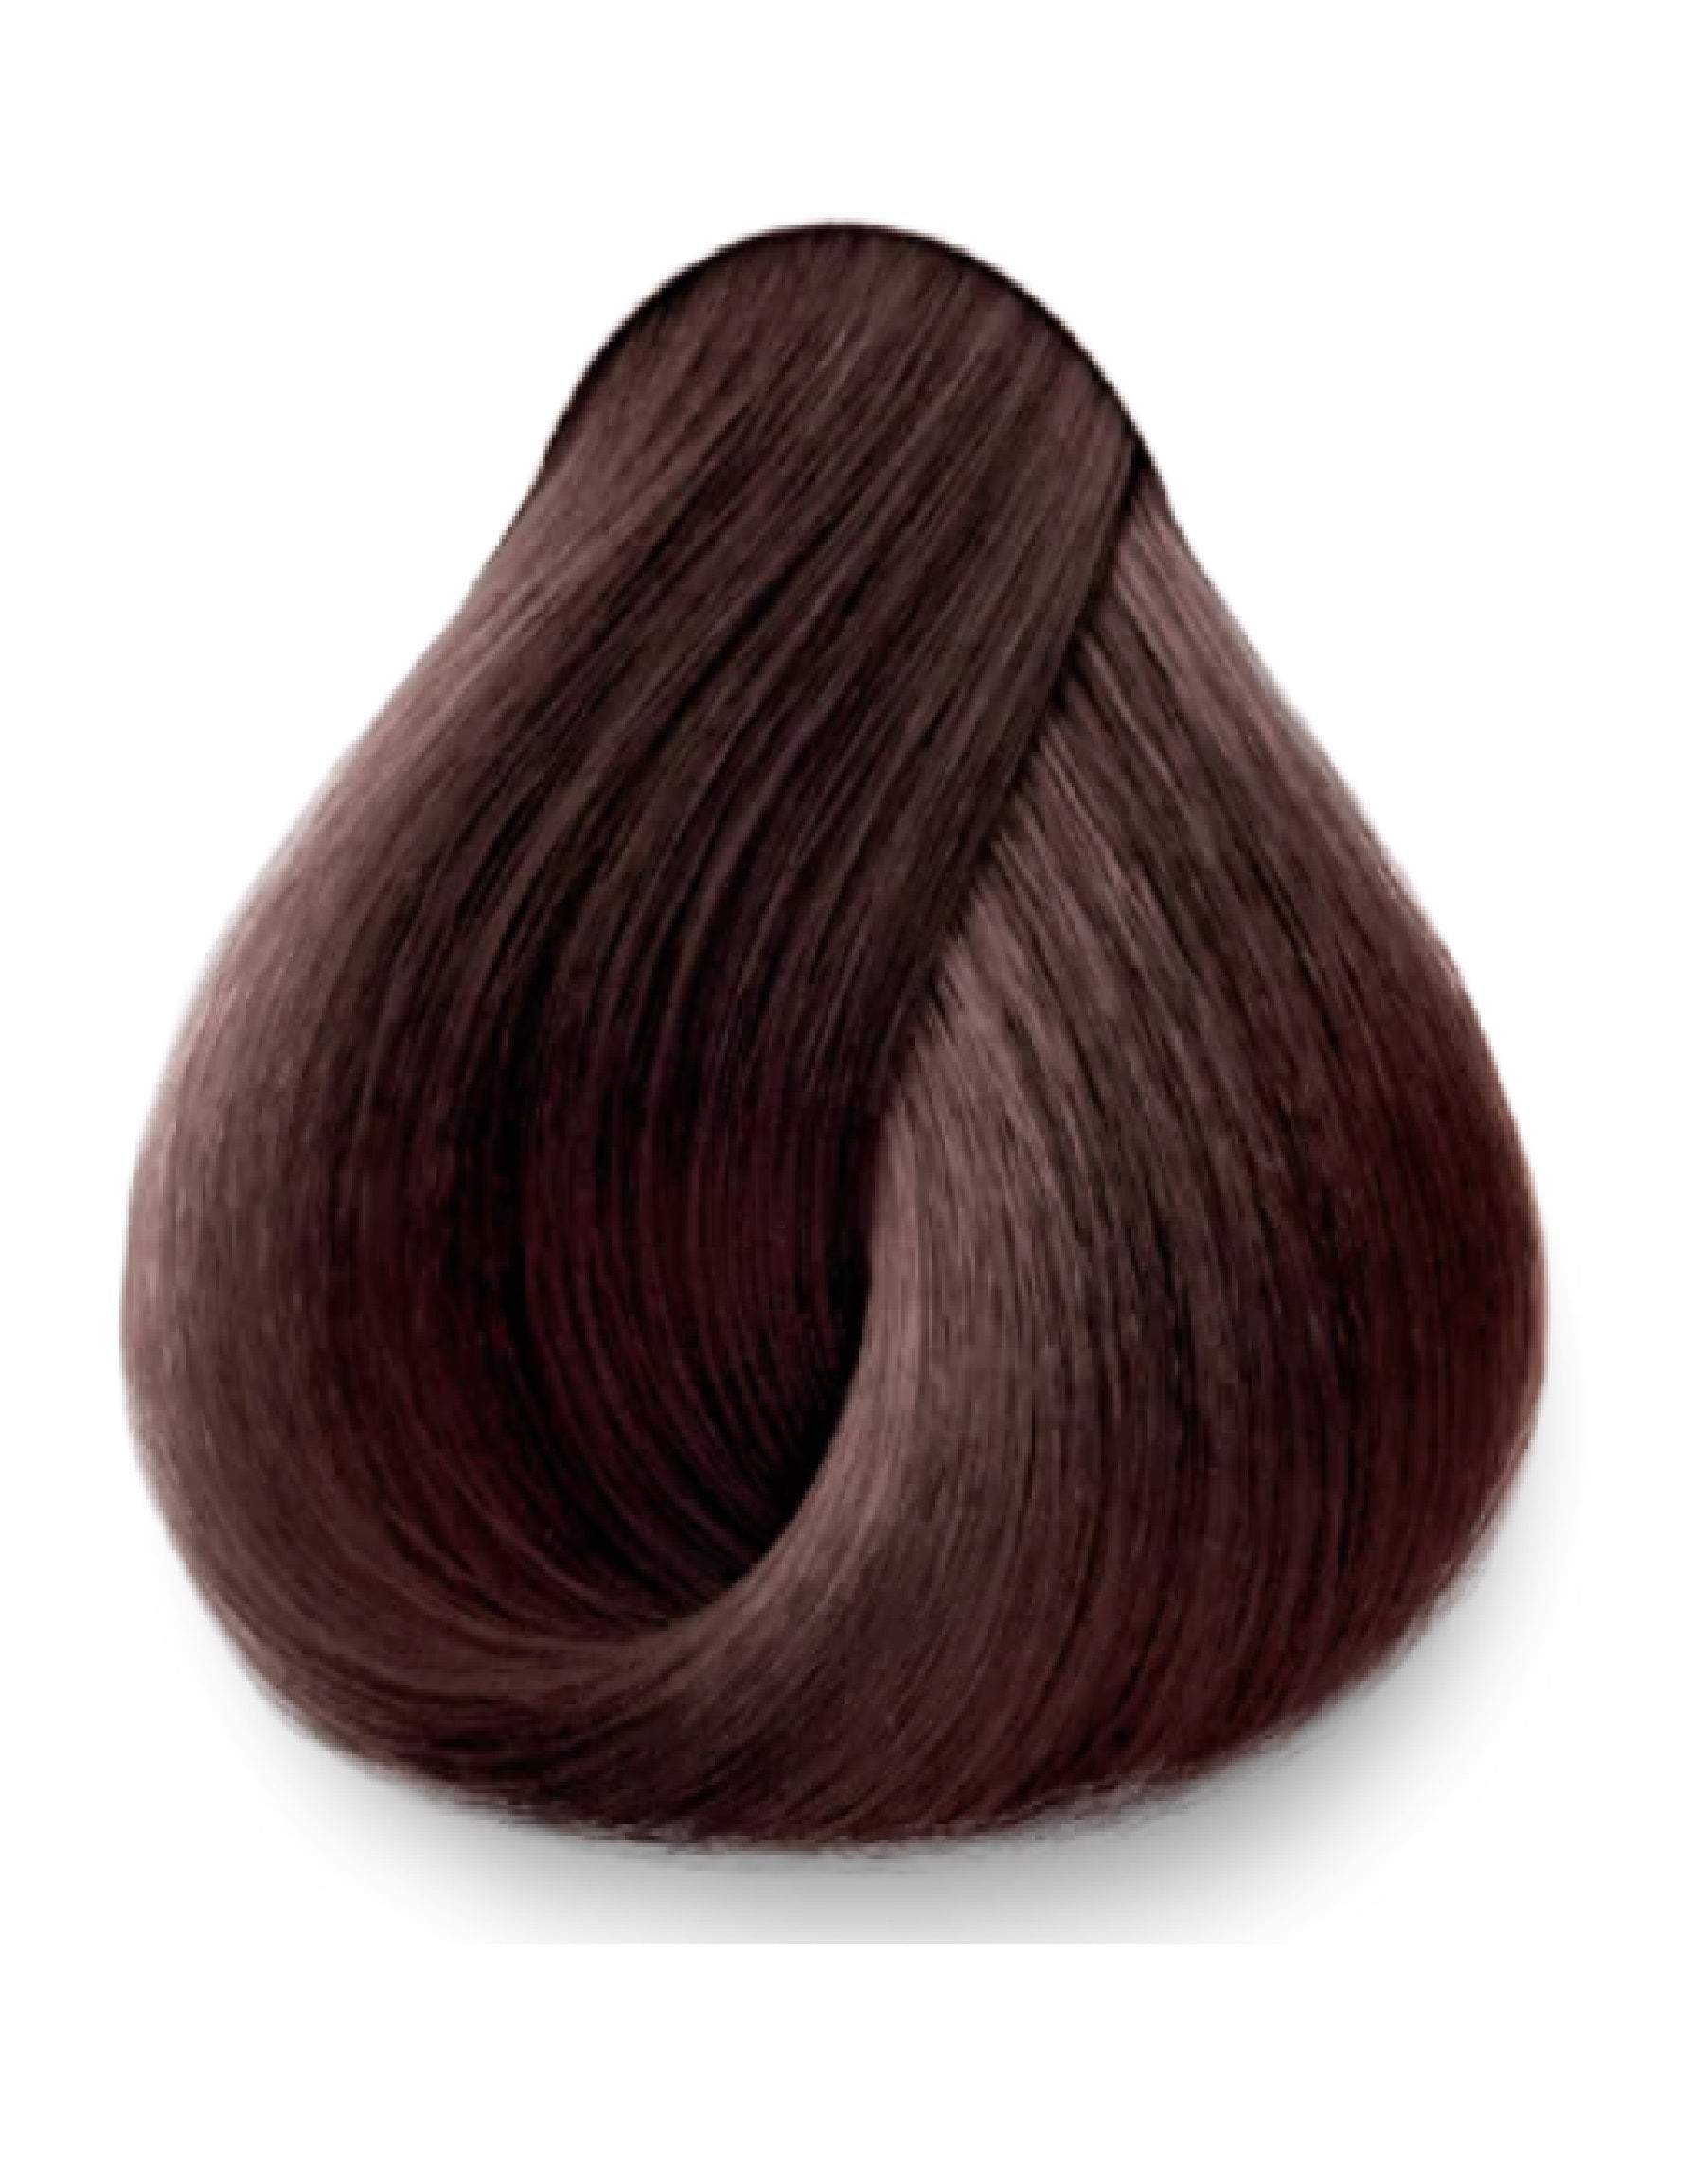 Kuul Creme Hair Color Brown to Blonde Permanent Dye